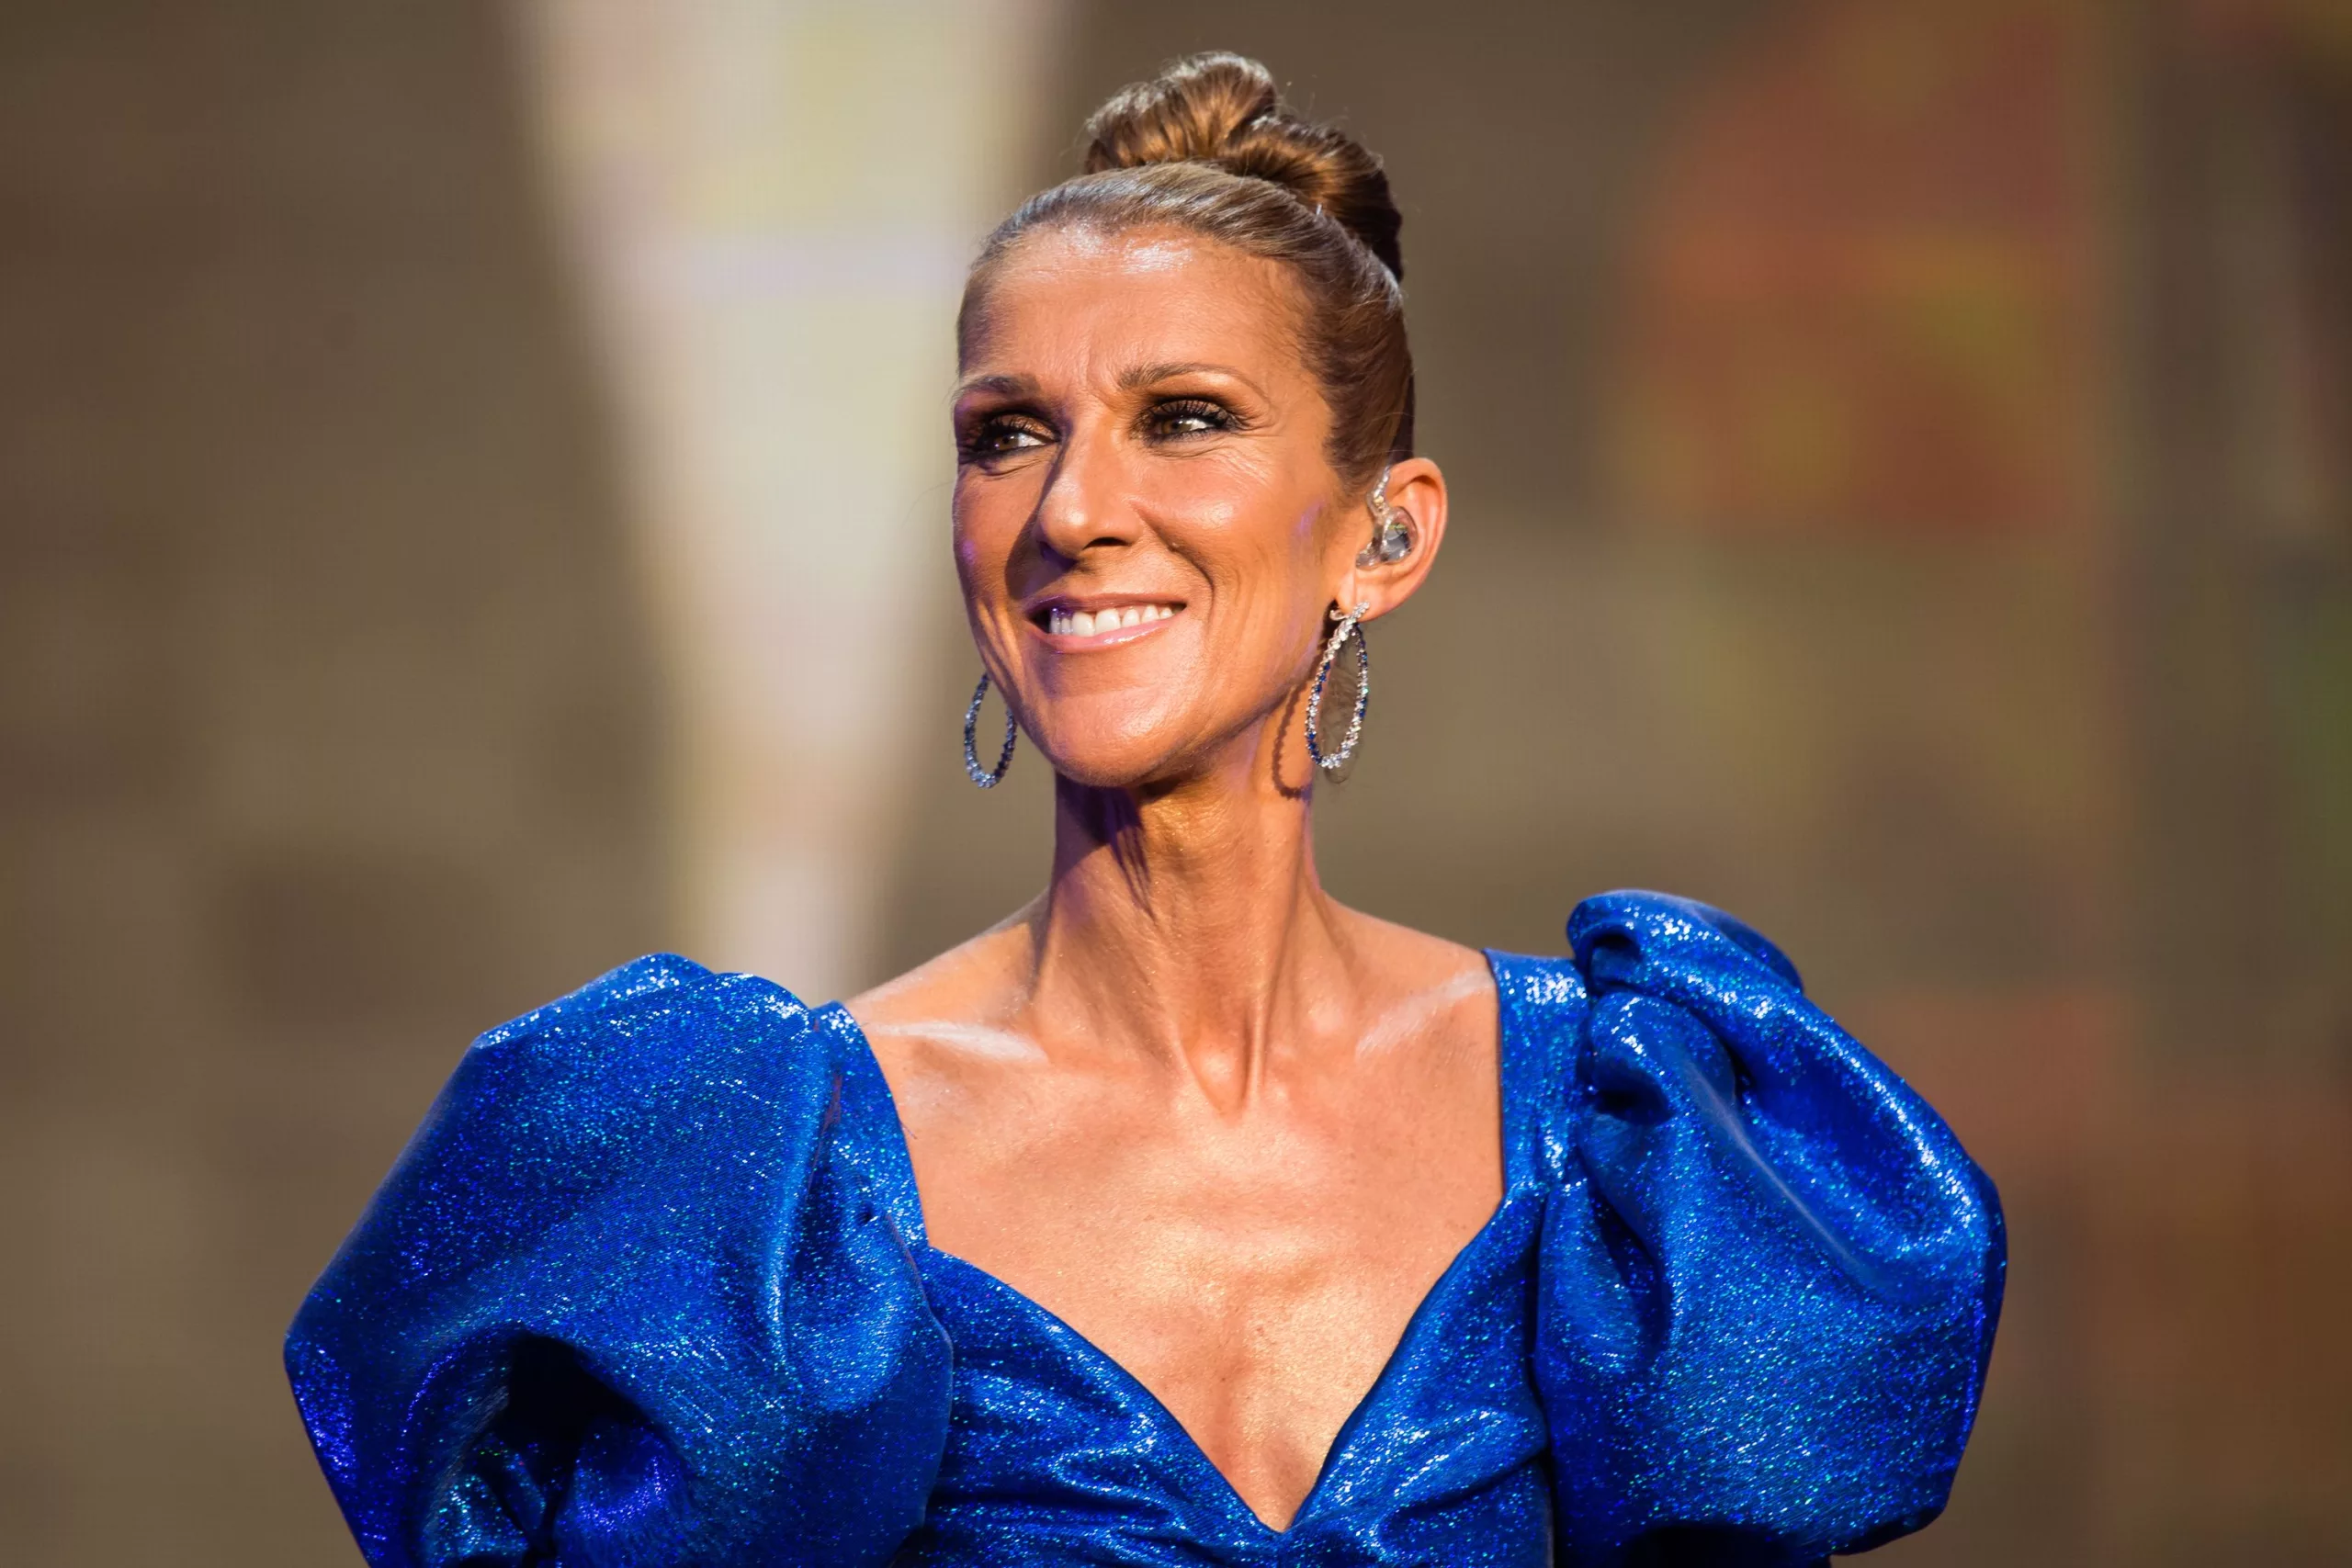 Celine Dion Cancels Her World Tour Following Battle With Incurable Neurological Disorder